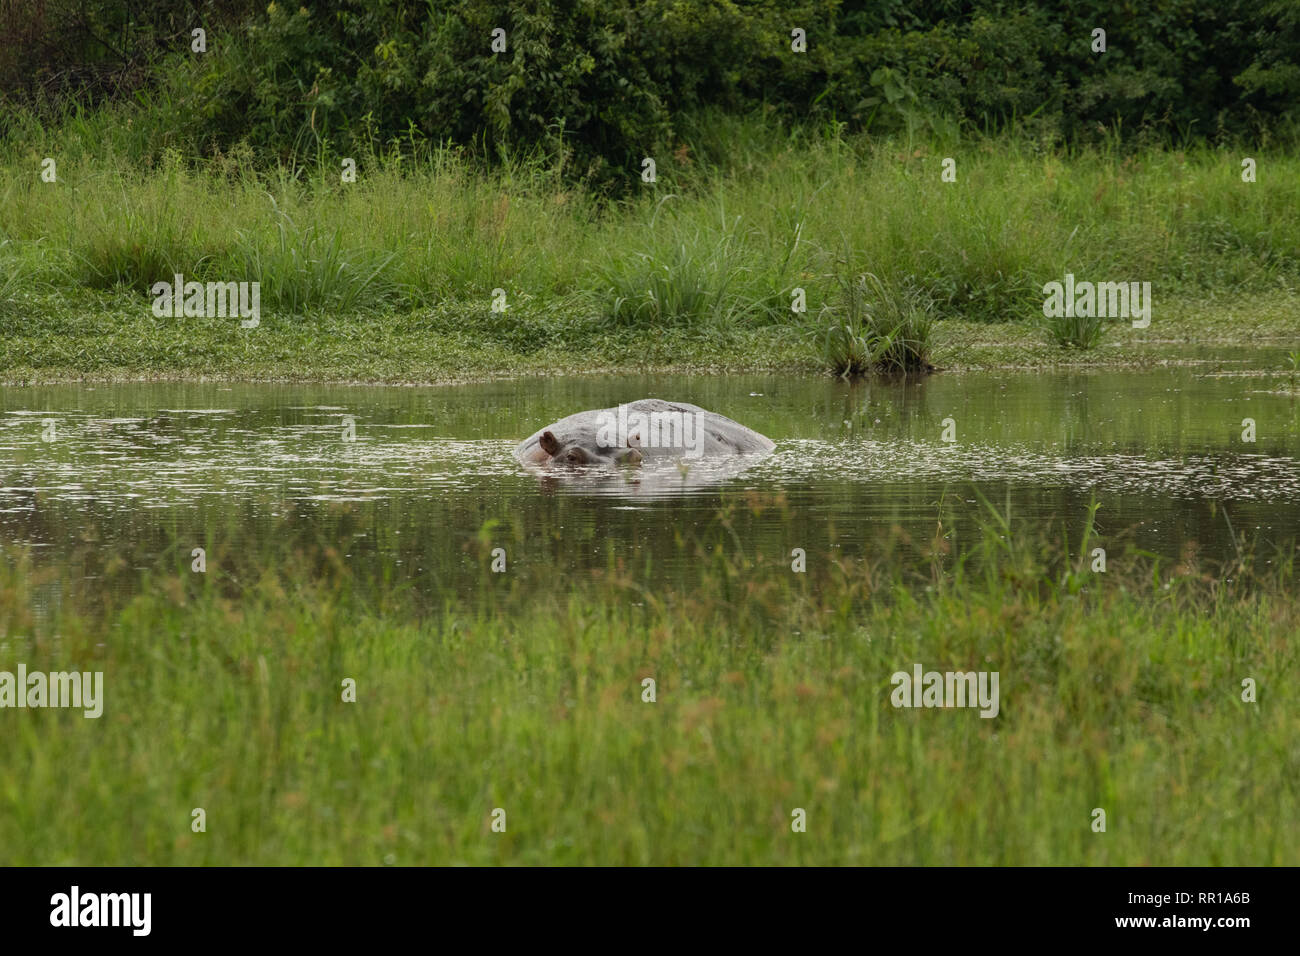 A large hippopotamus partially submerged in the Kazinga channel Queen Elizabeth National Park, Uganda Stock Photo